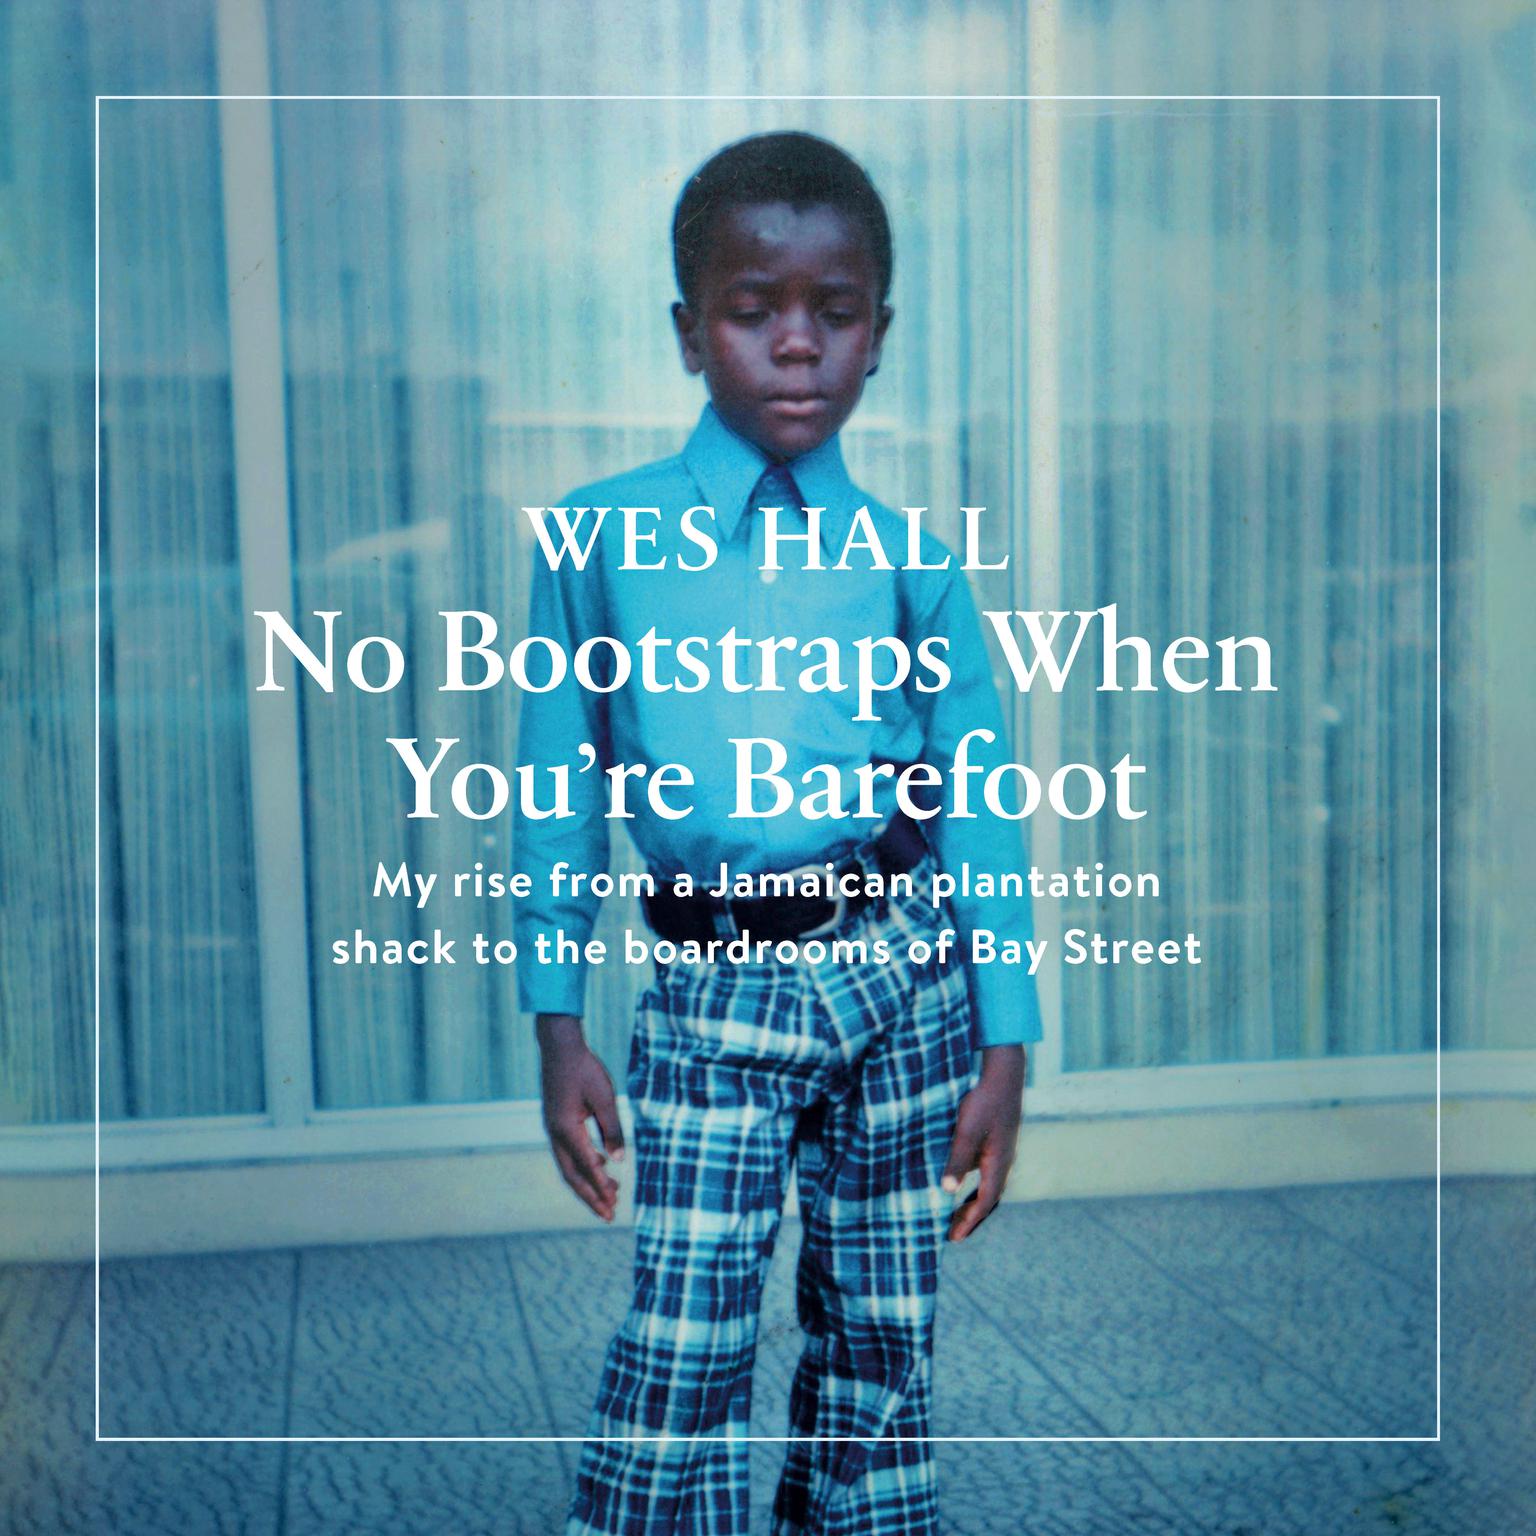 No Bootstraps When Youre Barefoot: My rise from a Jamaican plantation shack to the boardrooms of Bay Street Audiobook, by Wes Hall